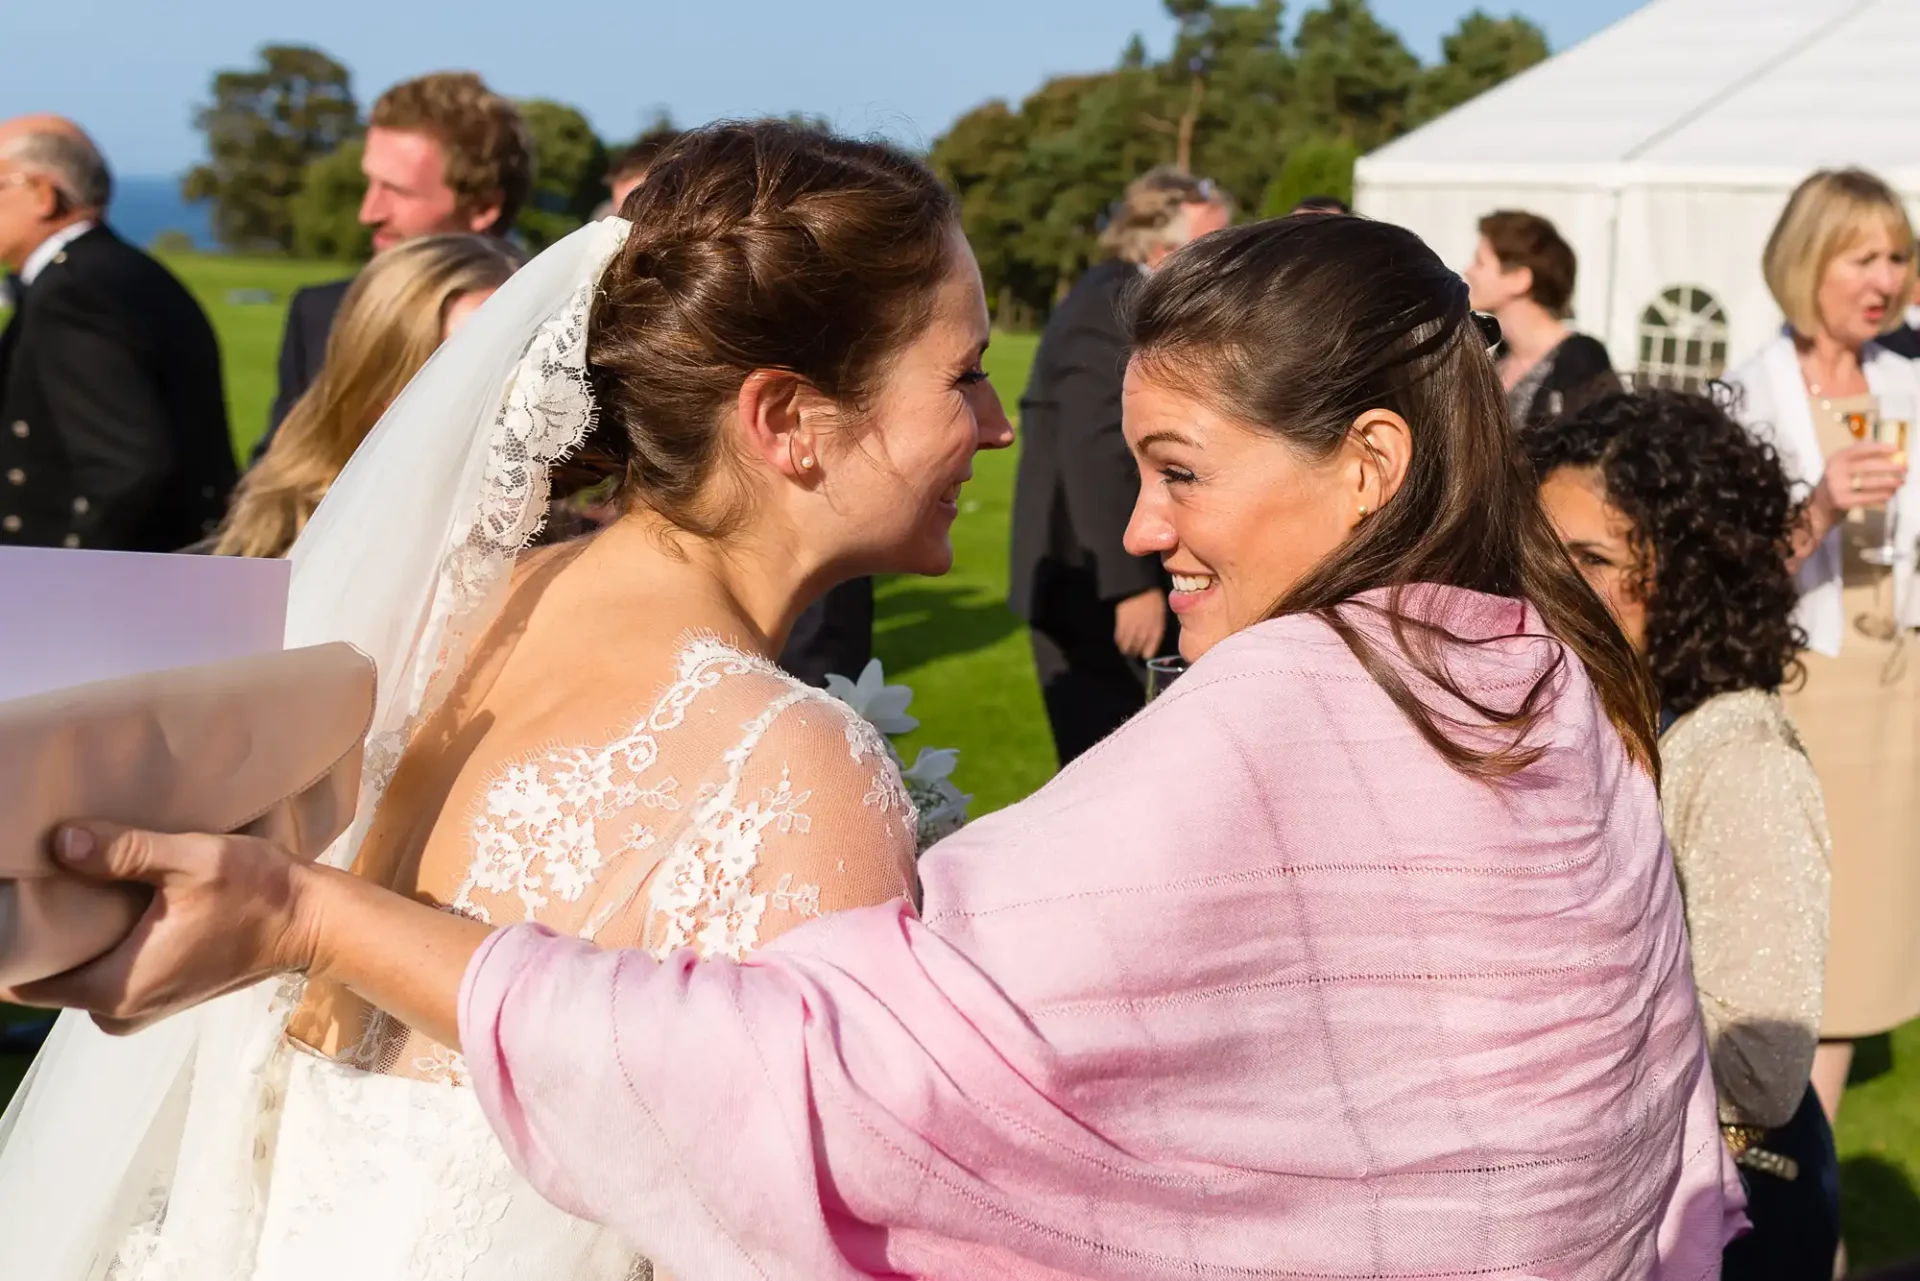 Bride in a lace dress smiling and hugging a woman in a pink jacket at an outdoor wedding reception.